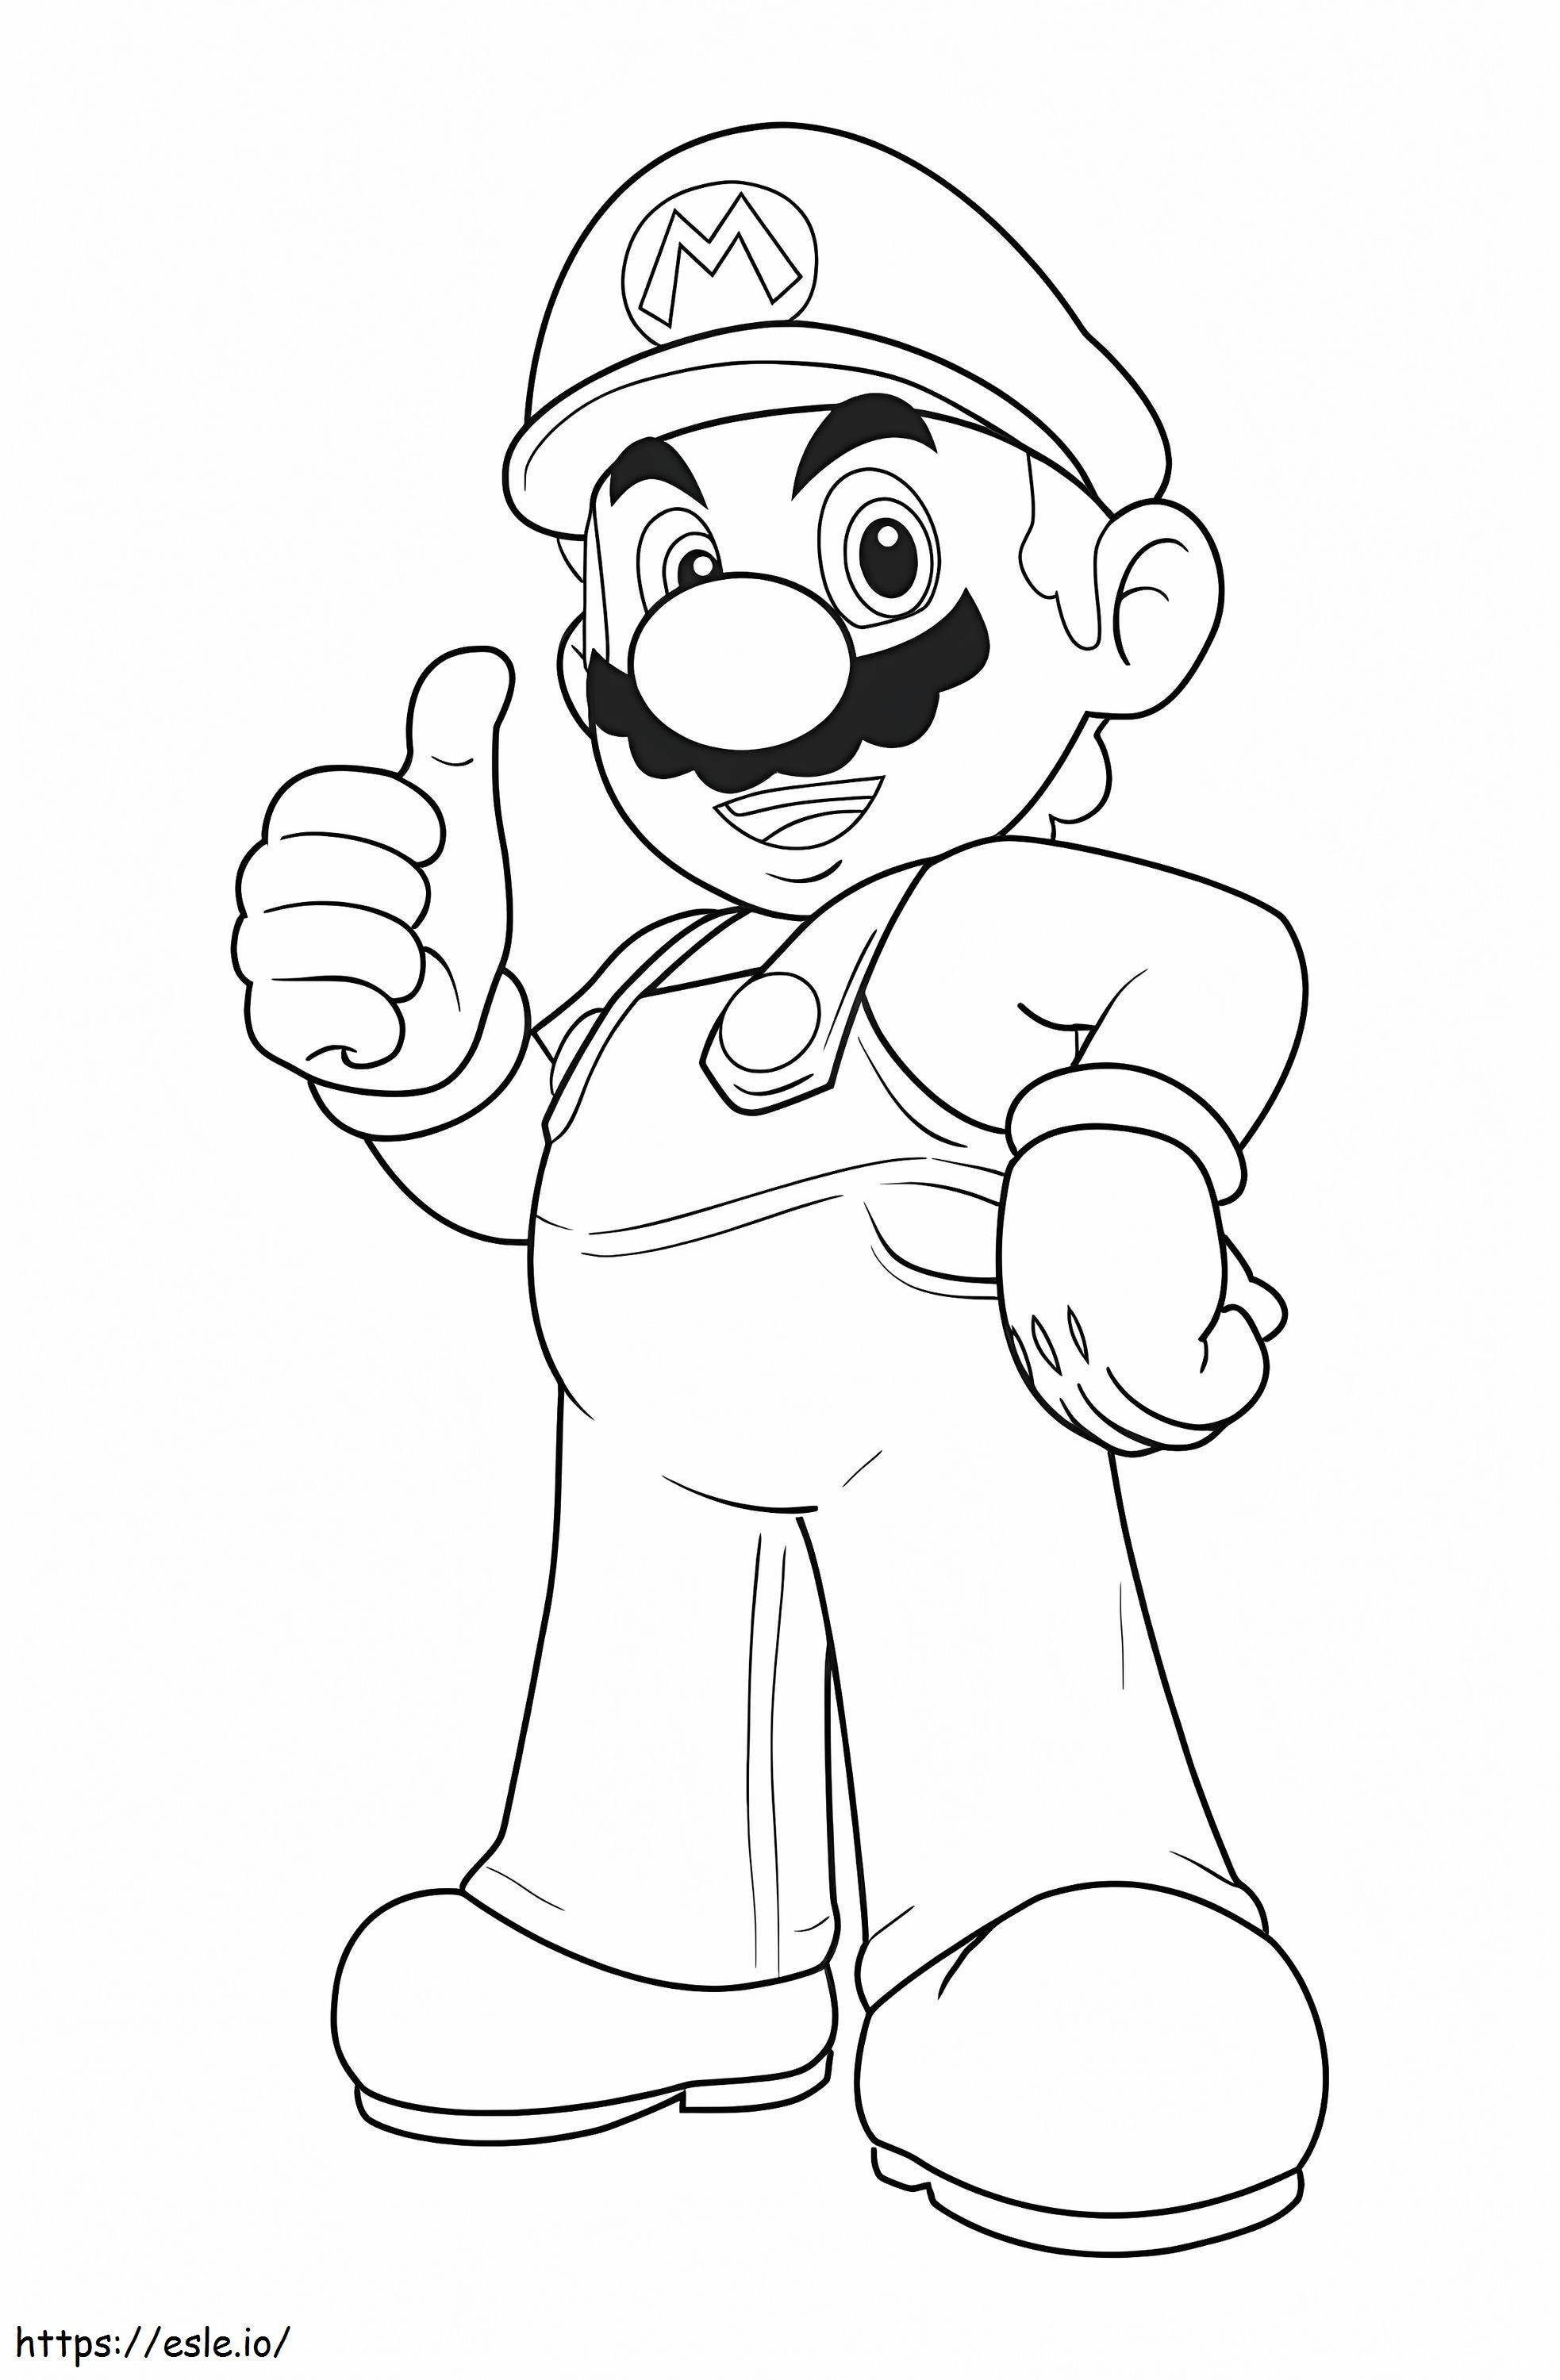 Tall Mario coloring page